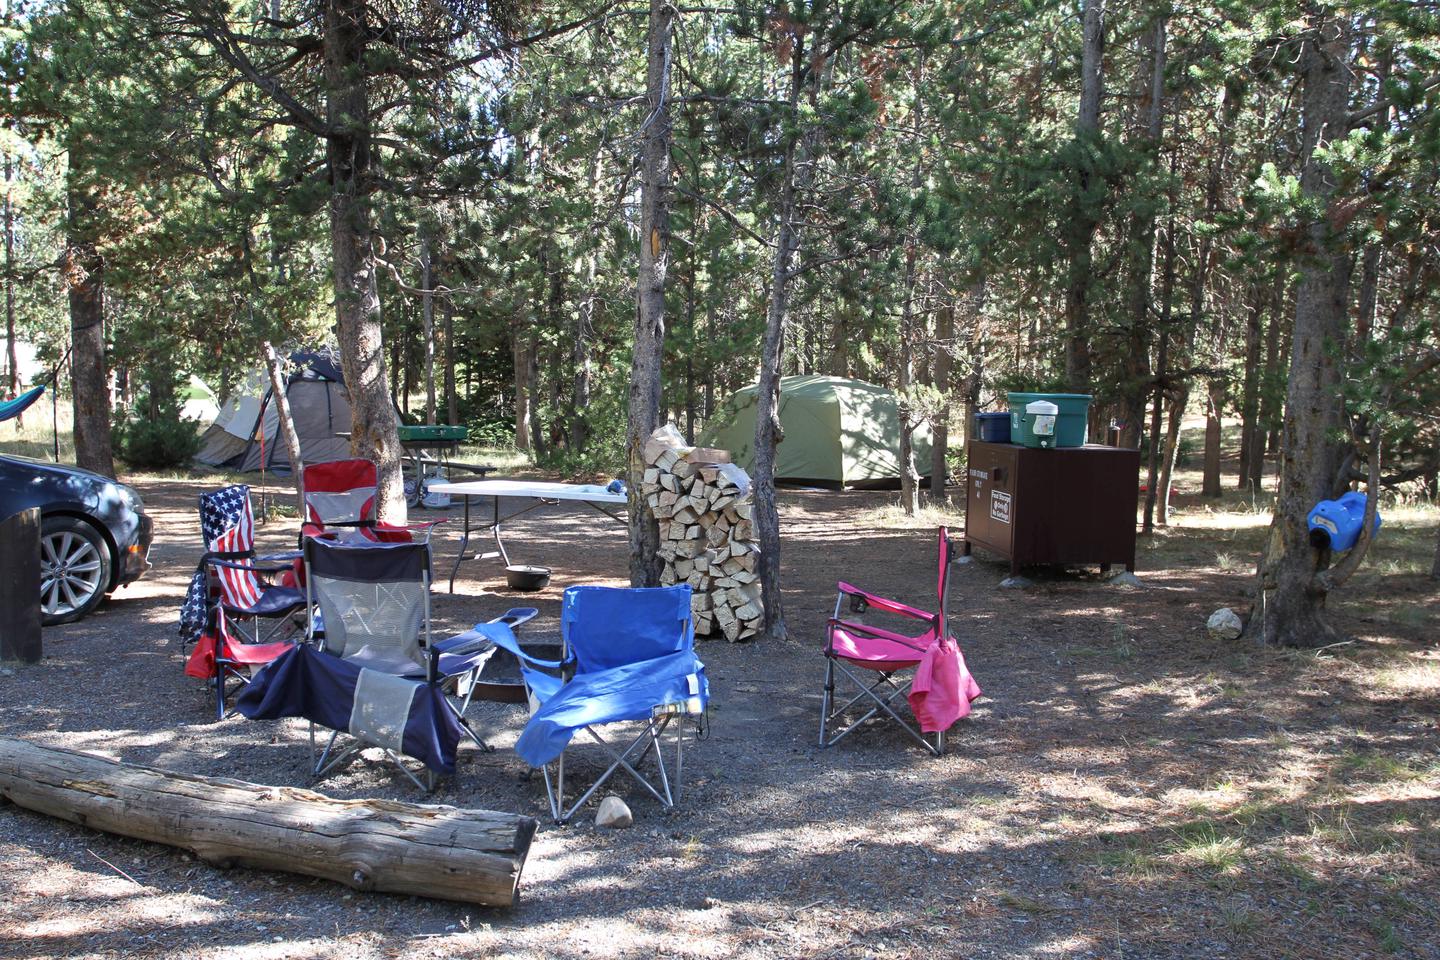 Indian Creek Campground site #41